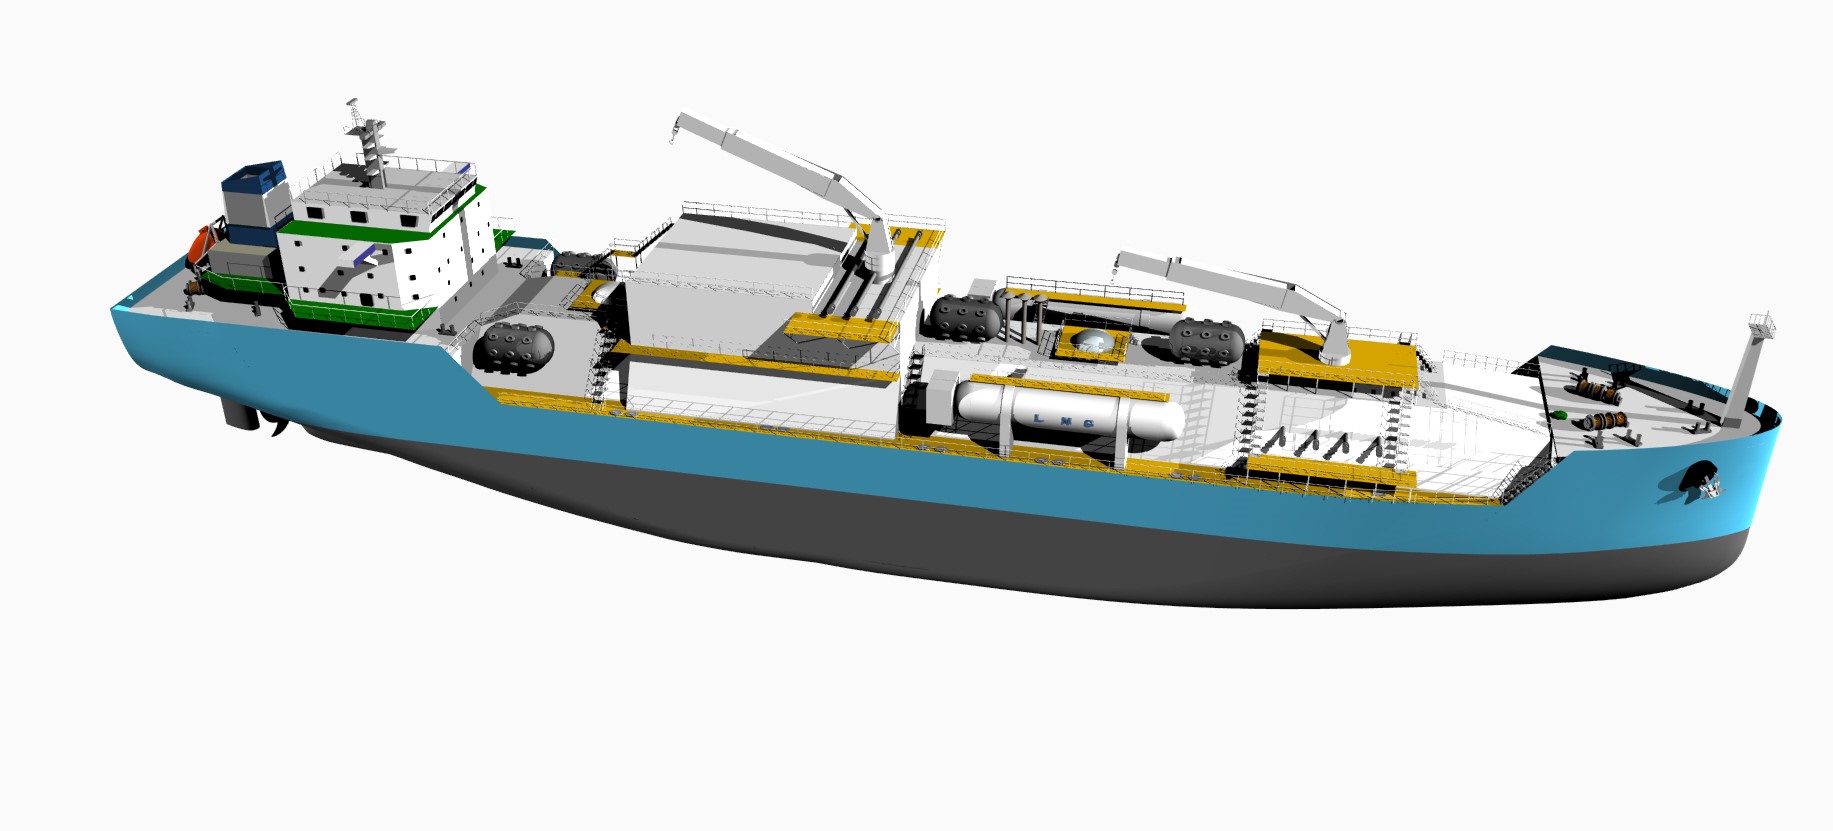 Wärtsilä tech ordered for China's first seagoing LNG bunker vessel